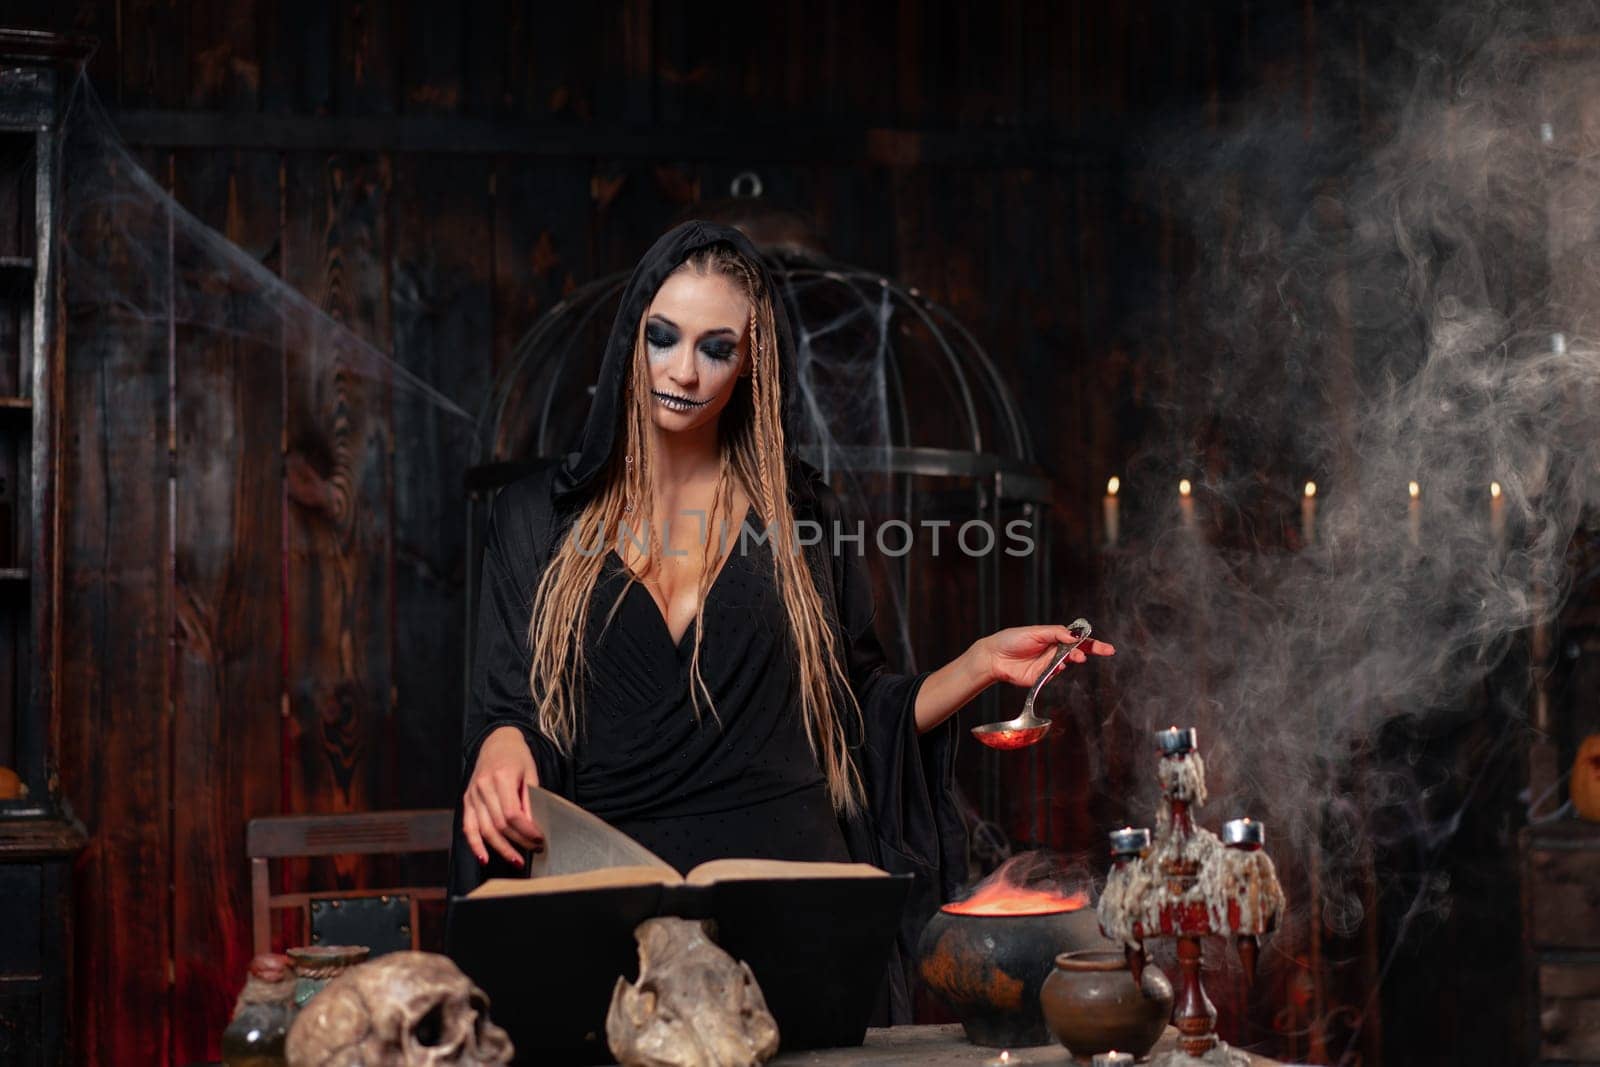 Halloween, witch use magic book and cauldron prepare poison or love potion. Black magic occult female wizard in dark room cage spider web human skull. Dressed black cloak with dreadlocks